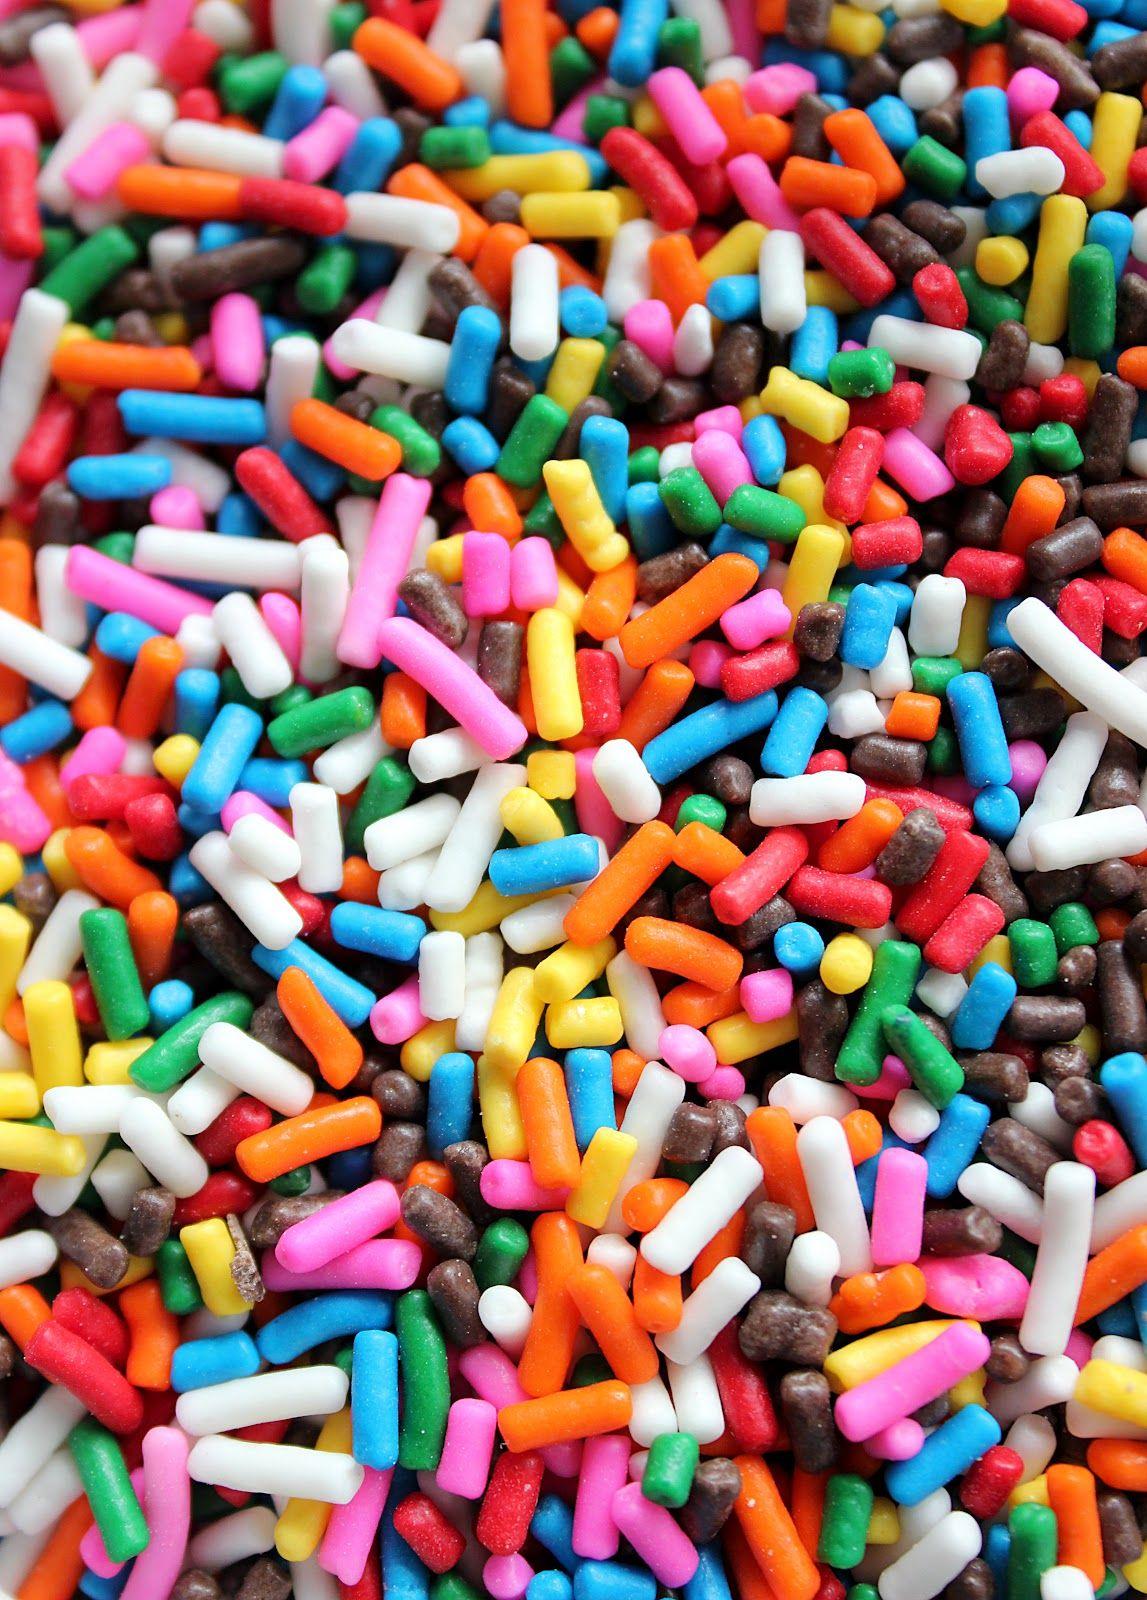 27181 Sprinkles Stock Photos HighRes Pictures and Images  Getty Images